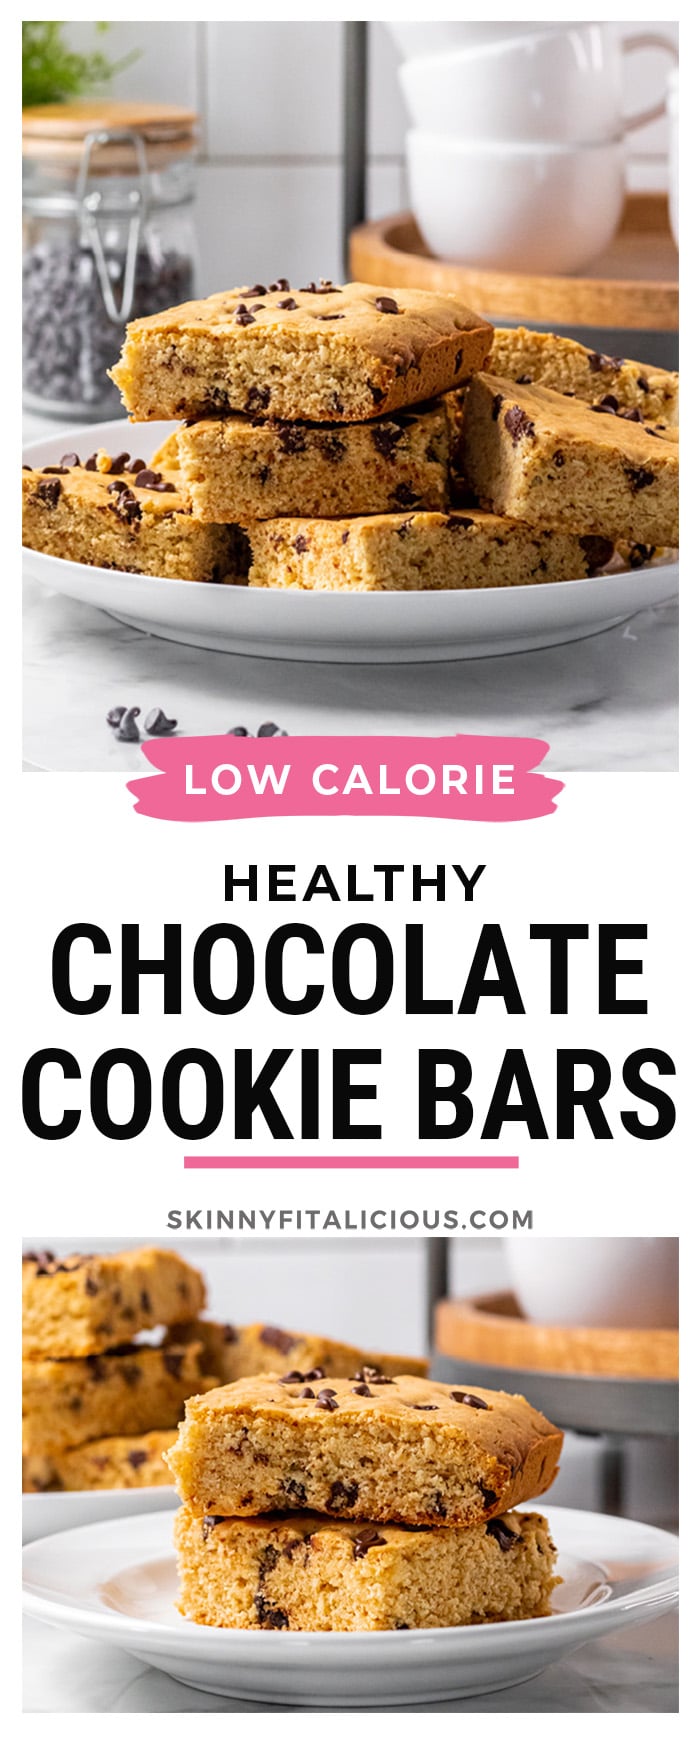 These Low Calorie Cookie Bars made with chocolate chips are delicious! Made with simple baking ingredients, they are only 100 calories per bar and easy to make! 